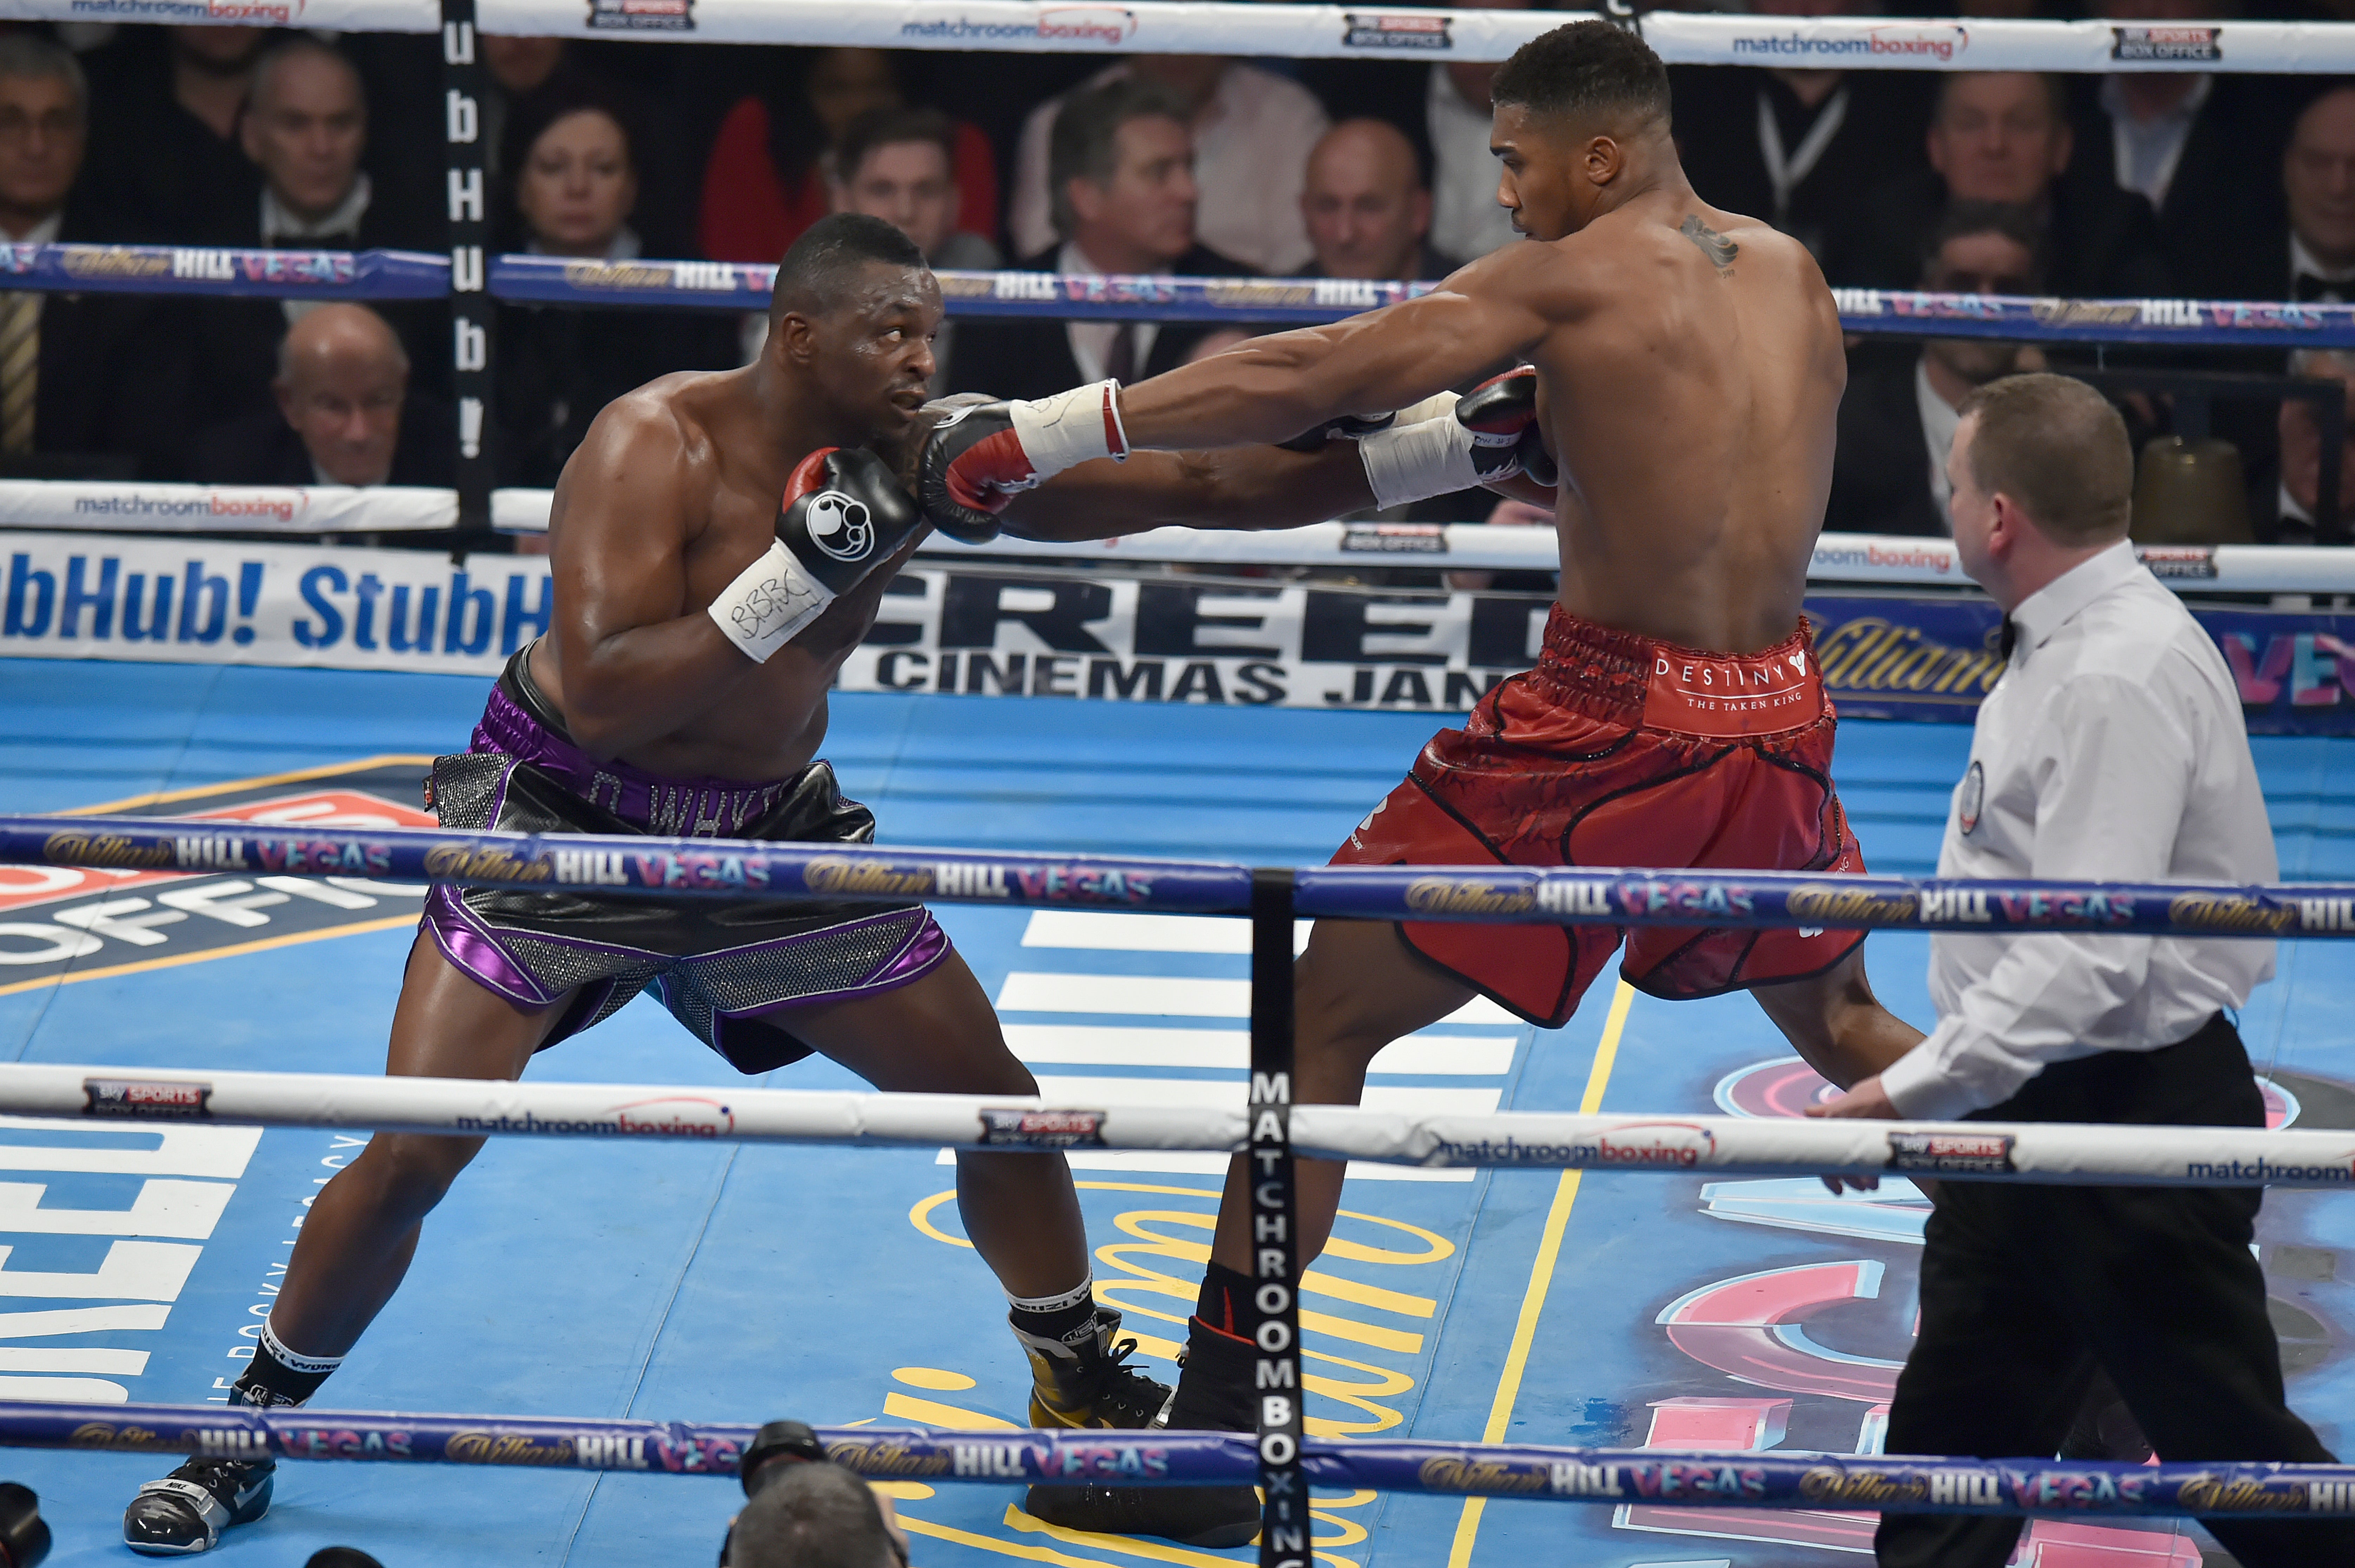 Anthony Joshua (right) is rooting for Dillian Whyte, who he beat in December 2015, against Tyson Fury